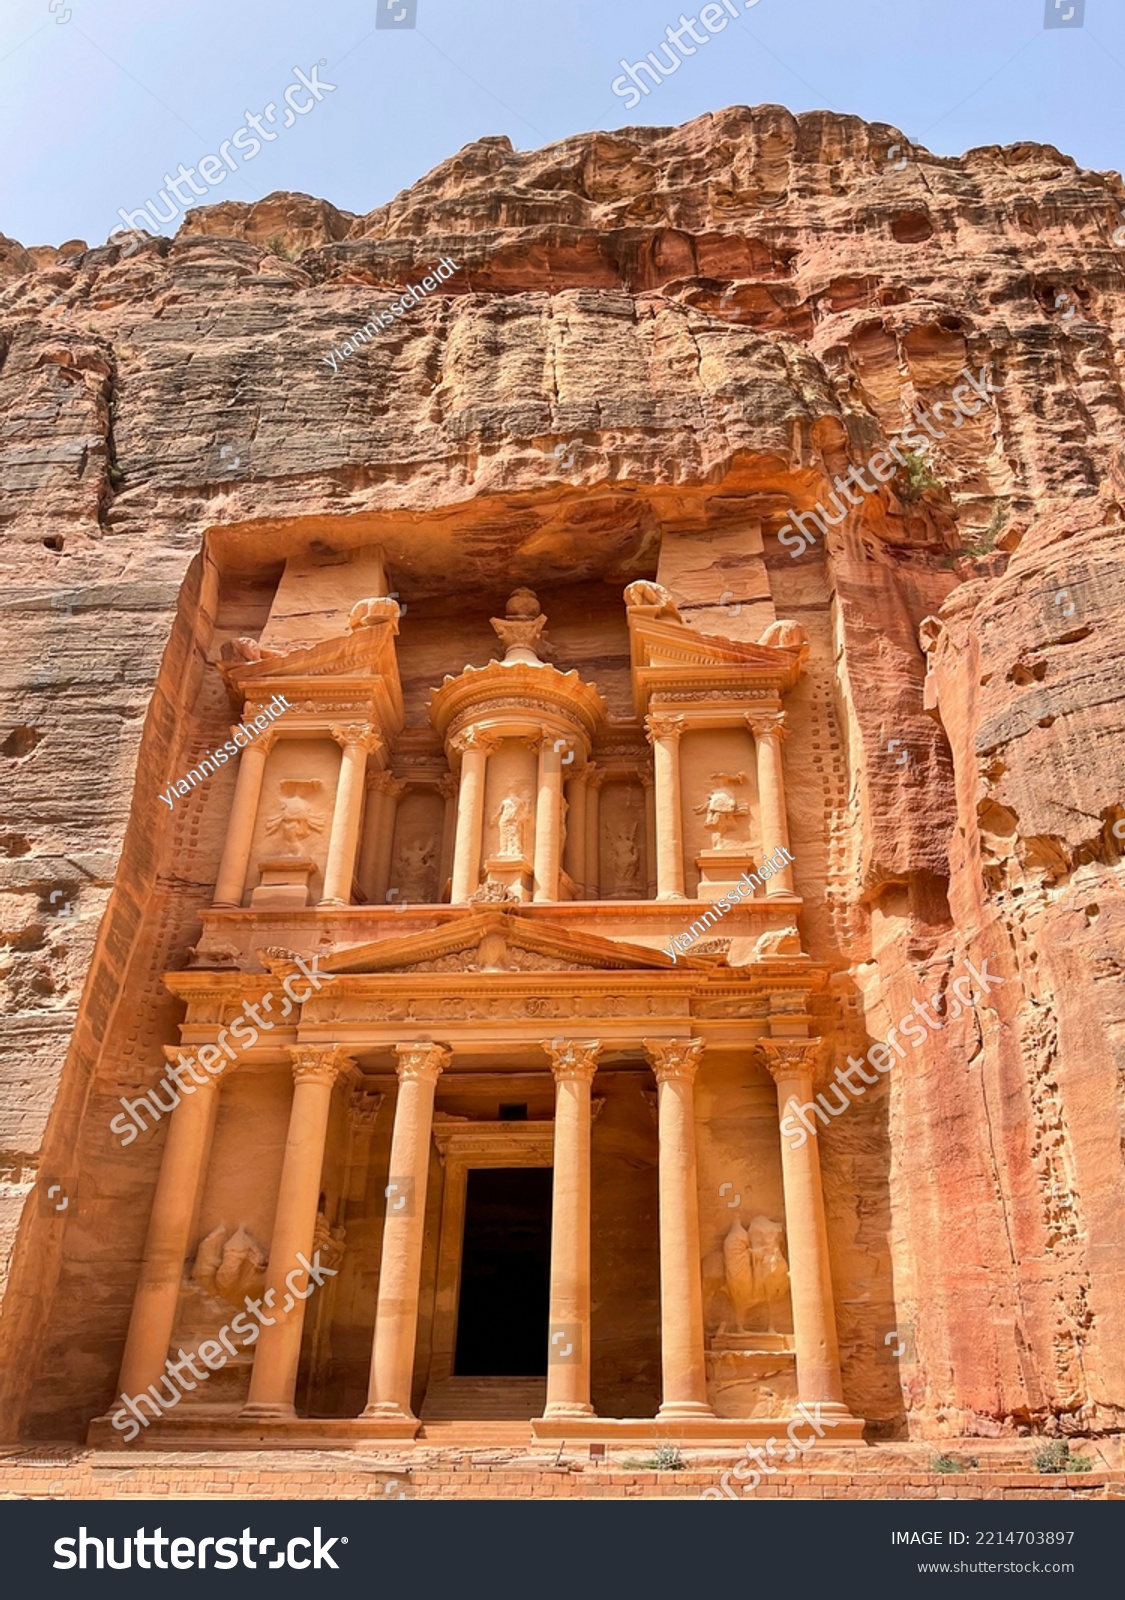 Treasury, the famous monument in Petra, a city of the Nabatean Kingdom inhabited by the Arabs in ancient times. It is also known as Al-Khazneh, with the same meaning. #2214703897